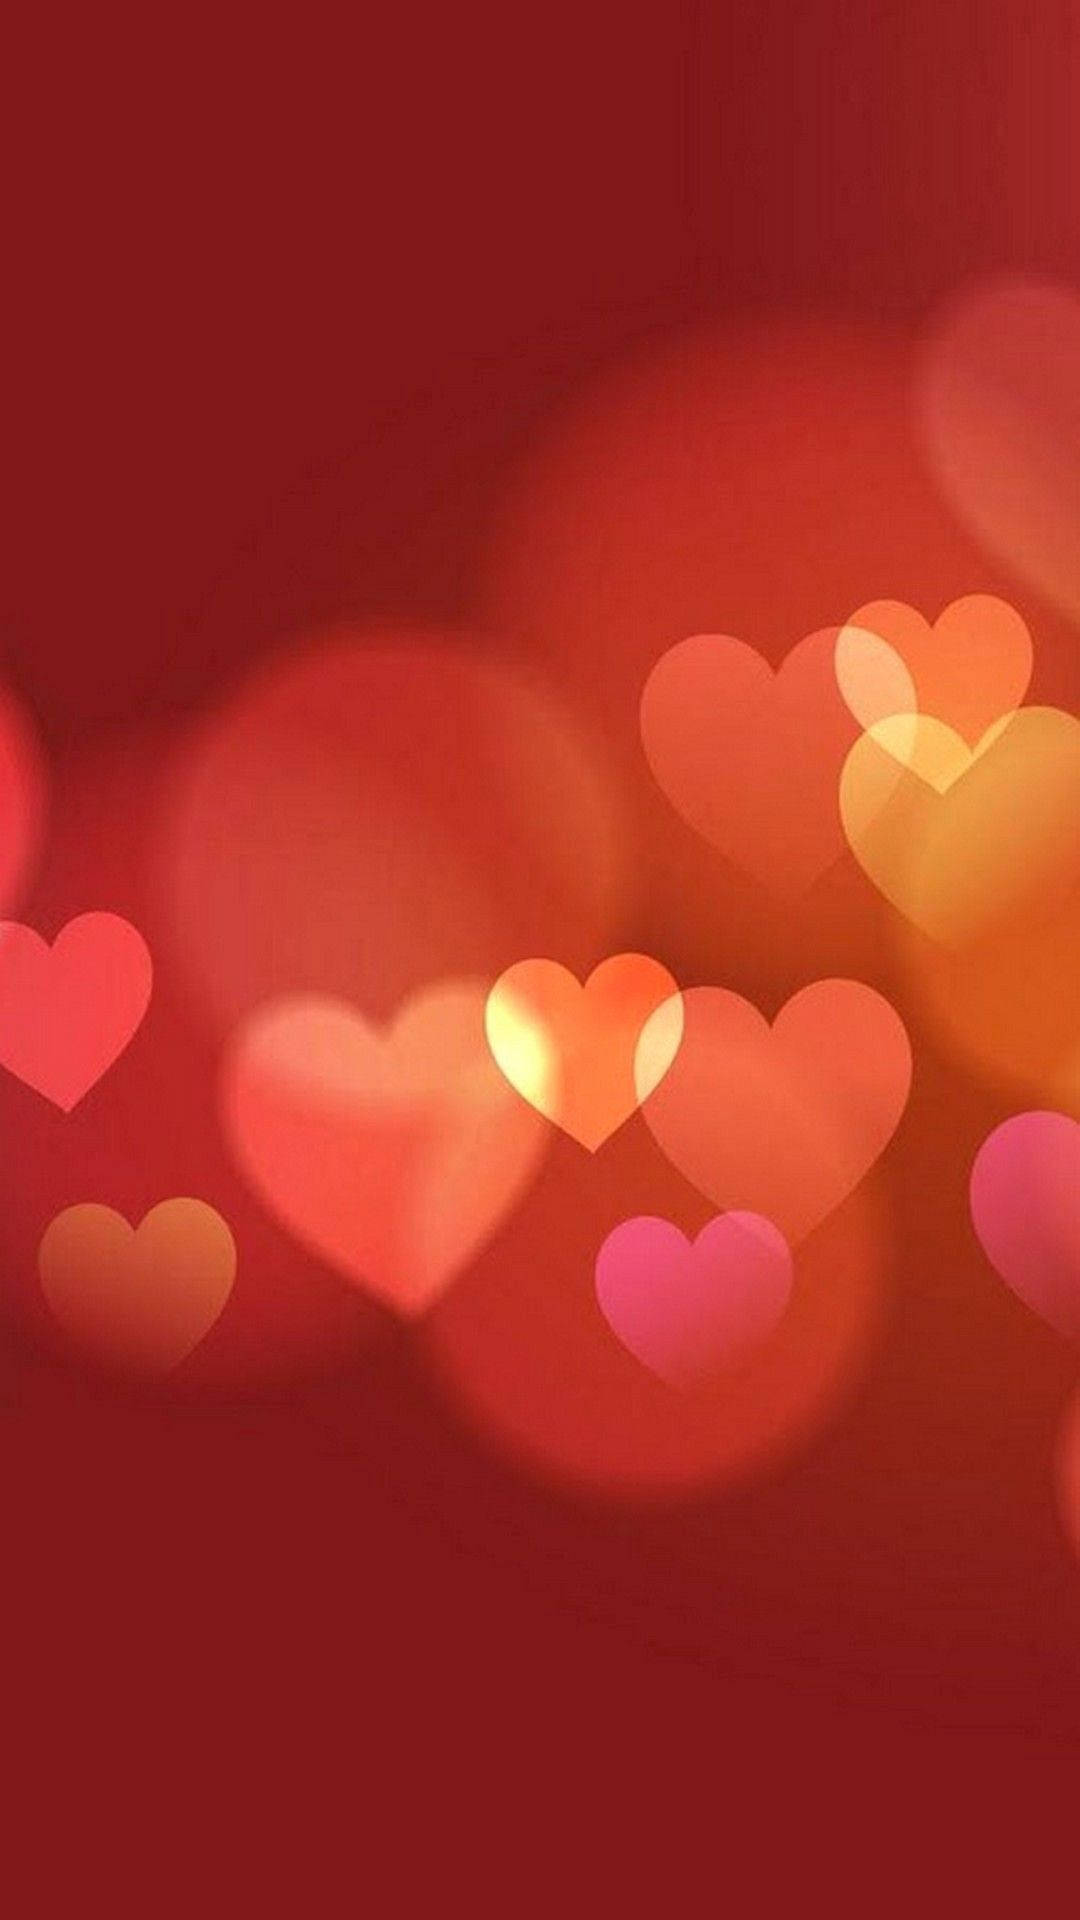 Red Background For Heart Iphone Display Wallpaper